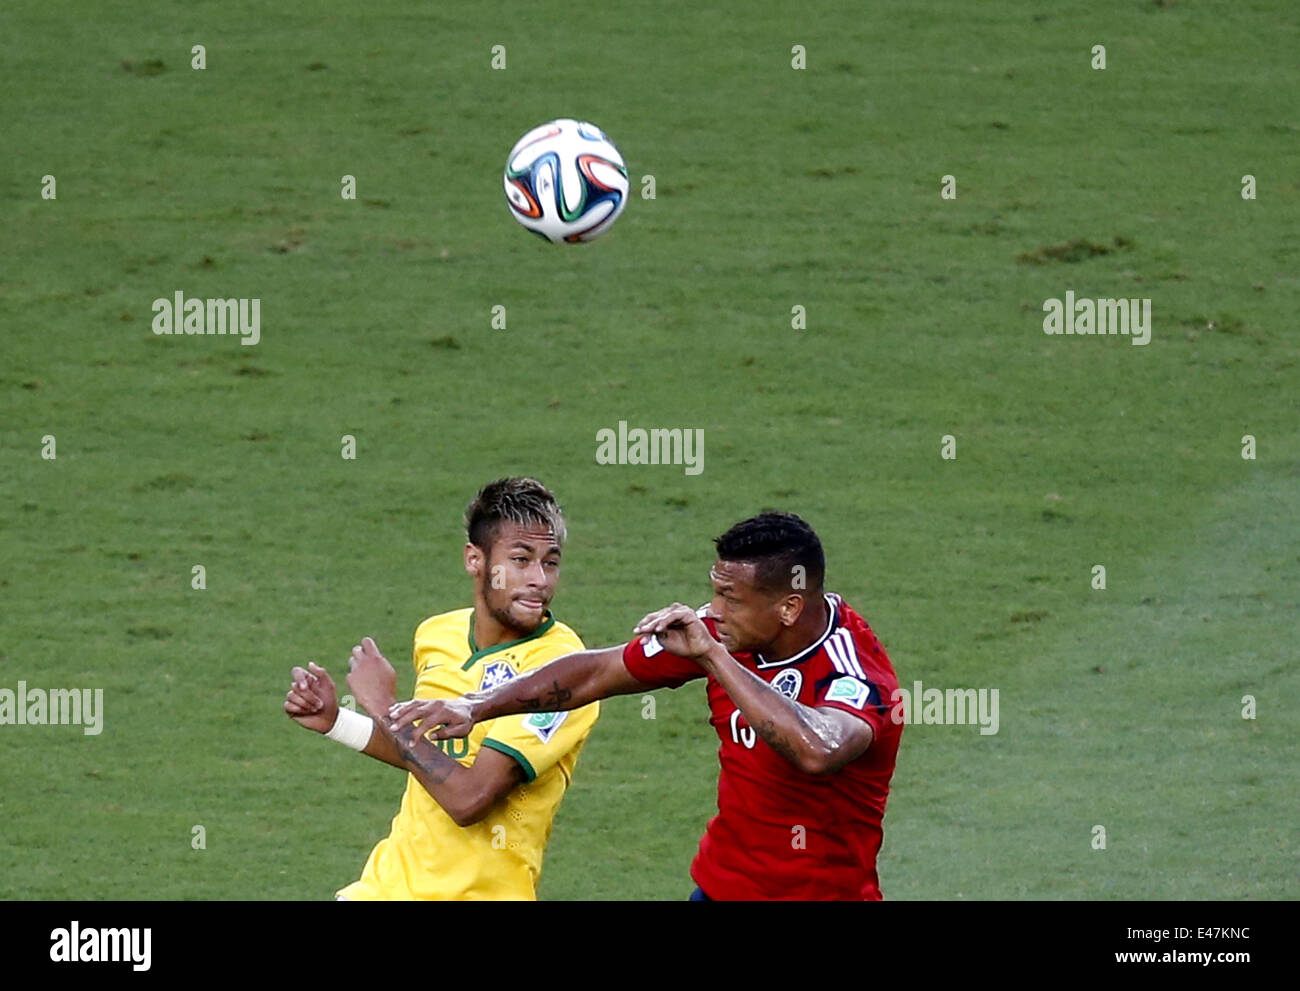 Fortaleza, Brazil. 4th July, 2014. Brazil's Neymar (L) competes for a header with Colombia's Freddy Guarin during a quarter-finals match between Brazil and Colombia of 2014 FIFA World Cup at the Estadio Castelao Stadium in Fortaleza, Brazil, on July 4, 2014. Credit:  Liao Yujie/Xinhua/Alamy Live News Stock Photo